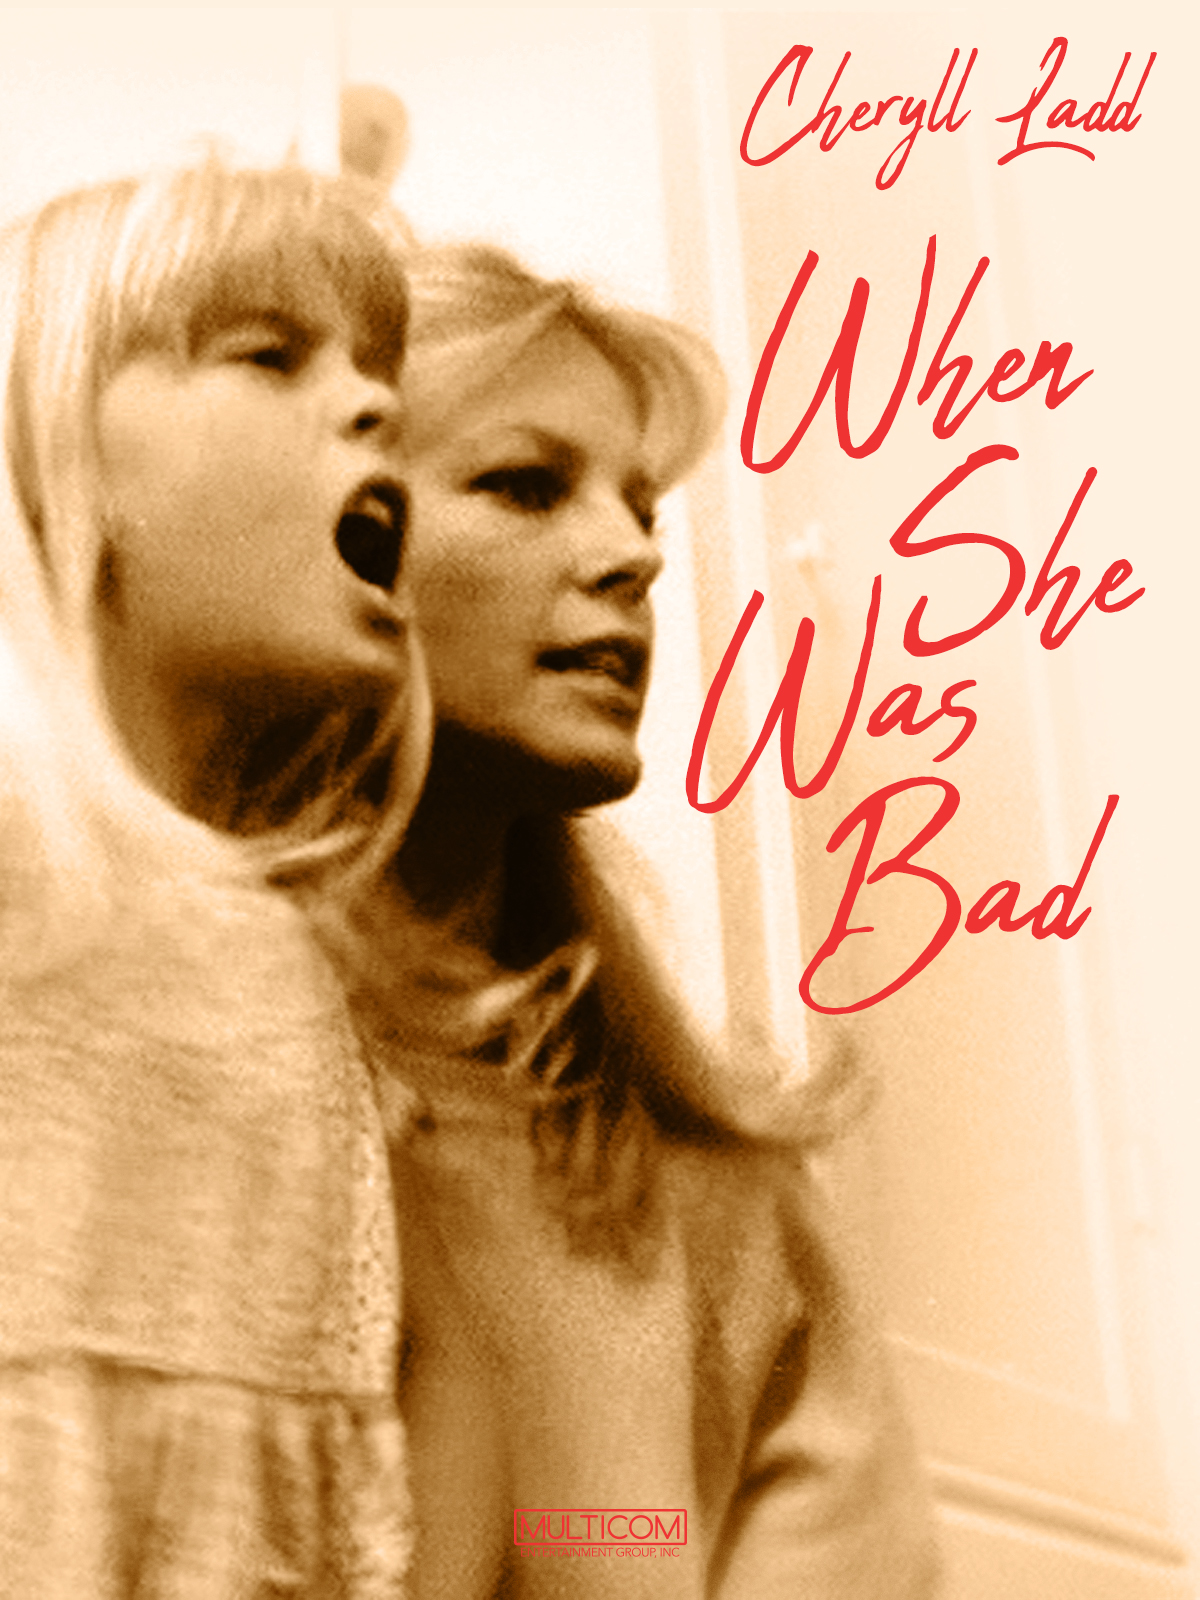 When She Was Bad... (1979) starring Cheryl Ladd on DVD on DVD